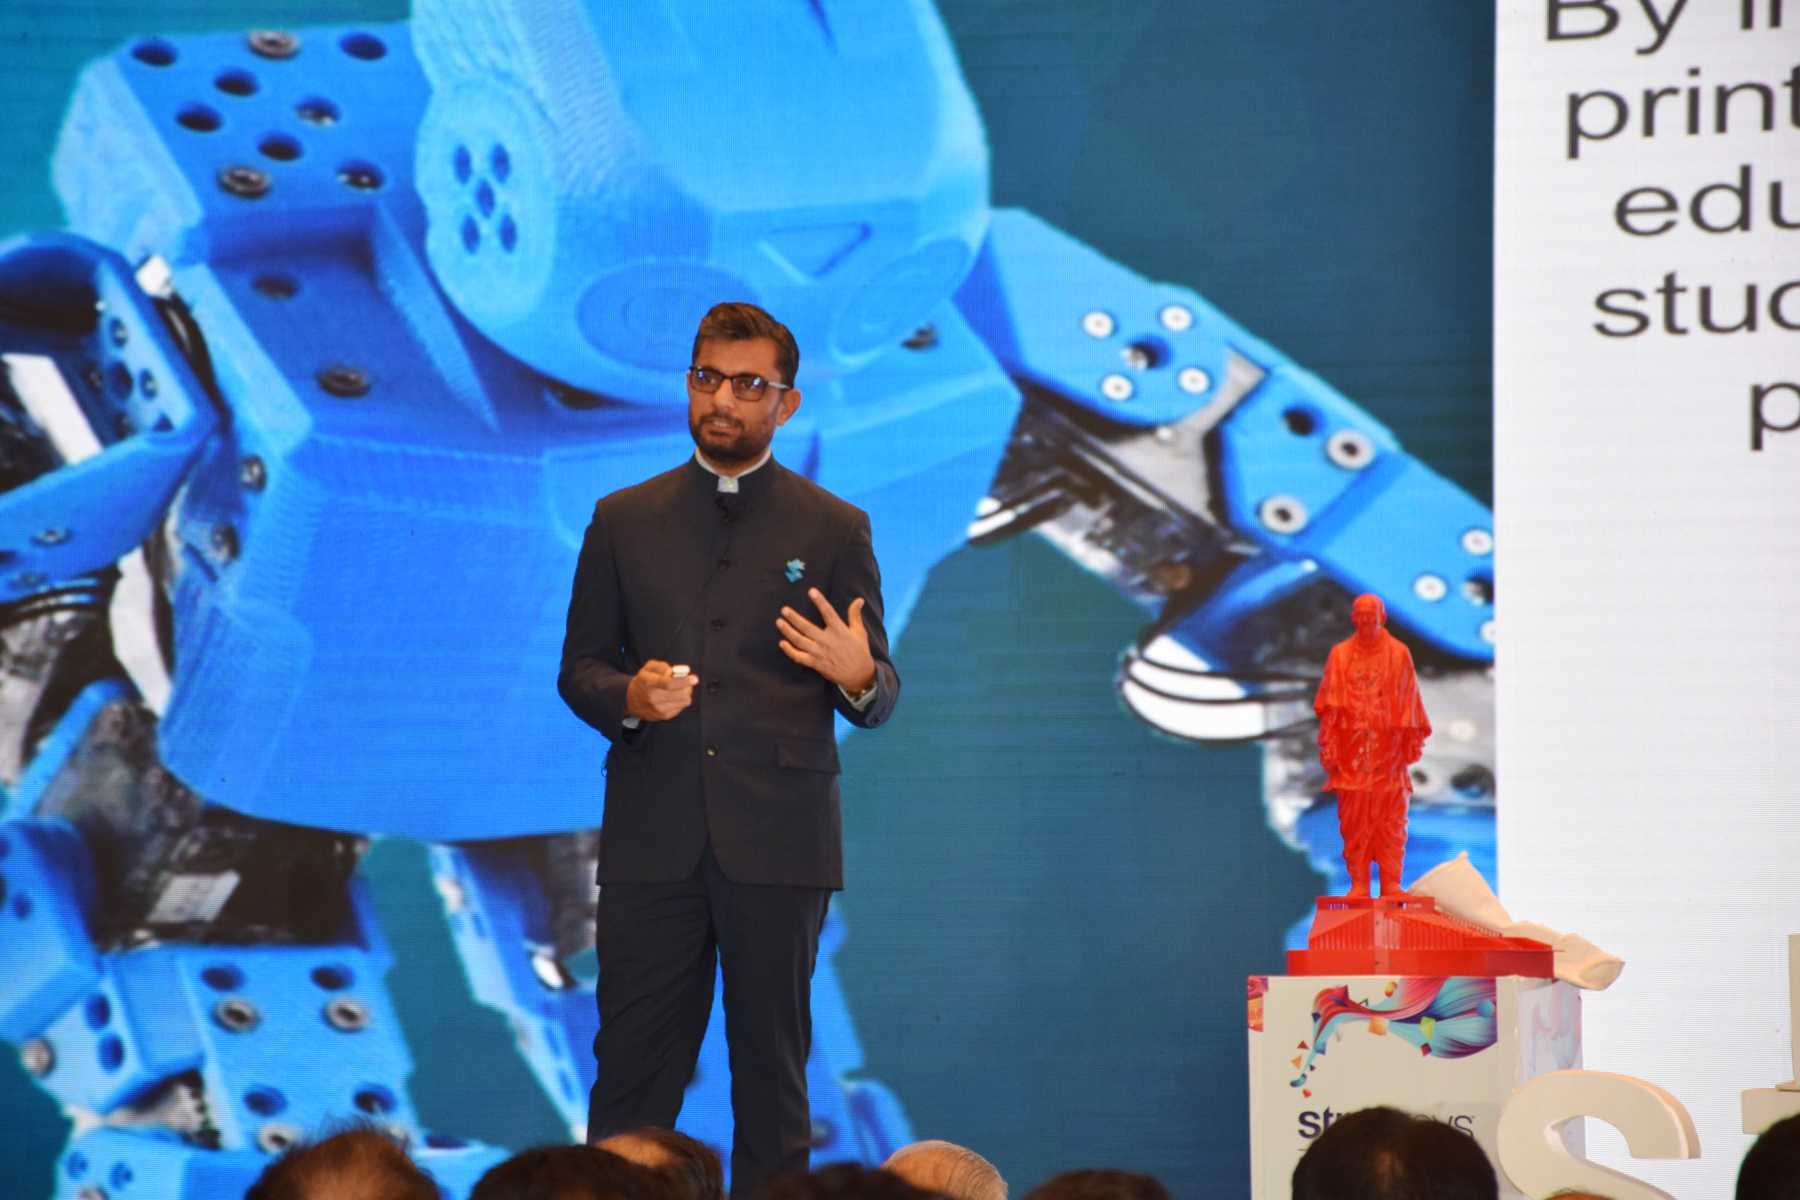 NTTF in collaboration with Stratasys launches India's first additive manufacturing certification course at Stratasys India User Forum 2018 - Machine Insider